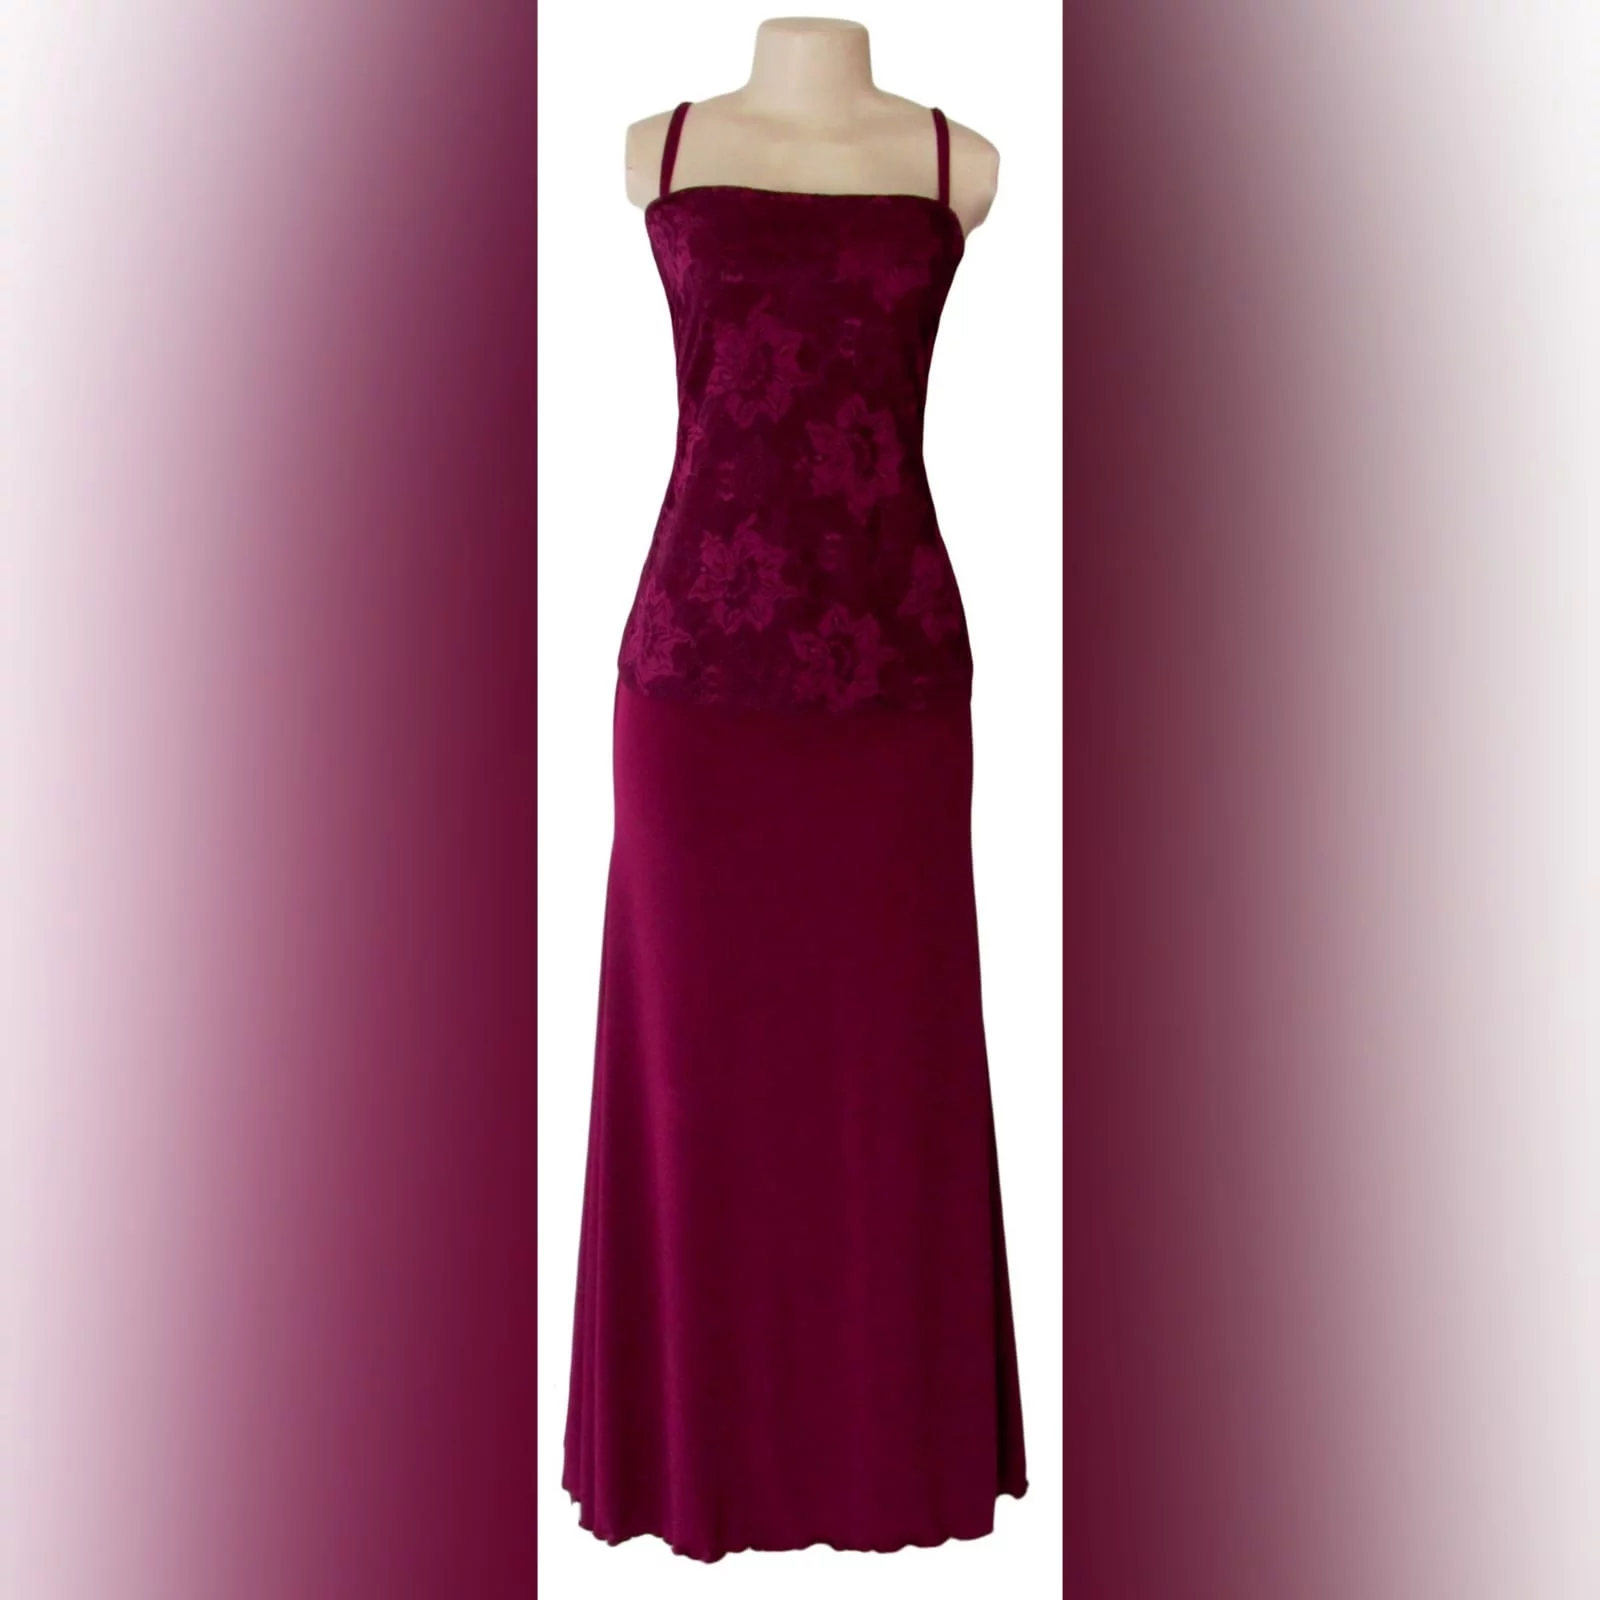 Burgundy 3 piece mother of the bride outfit 2 burgundy 3 piece mother of the bride outfit. With a lace top and a removable lace jacket with collar, ruched belt and sheer 3/4 sleeves with a cuff.